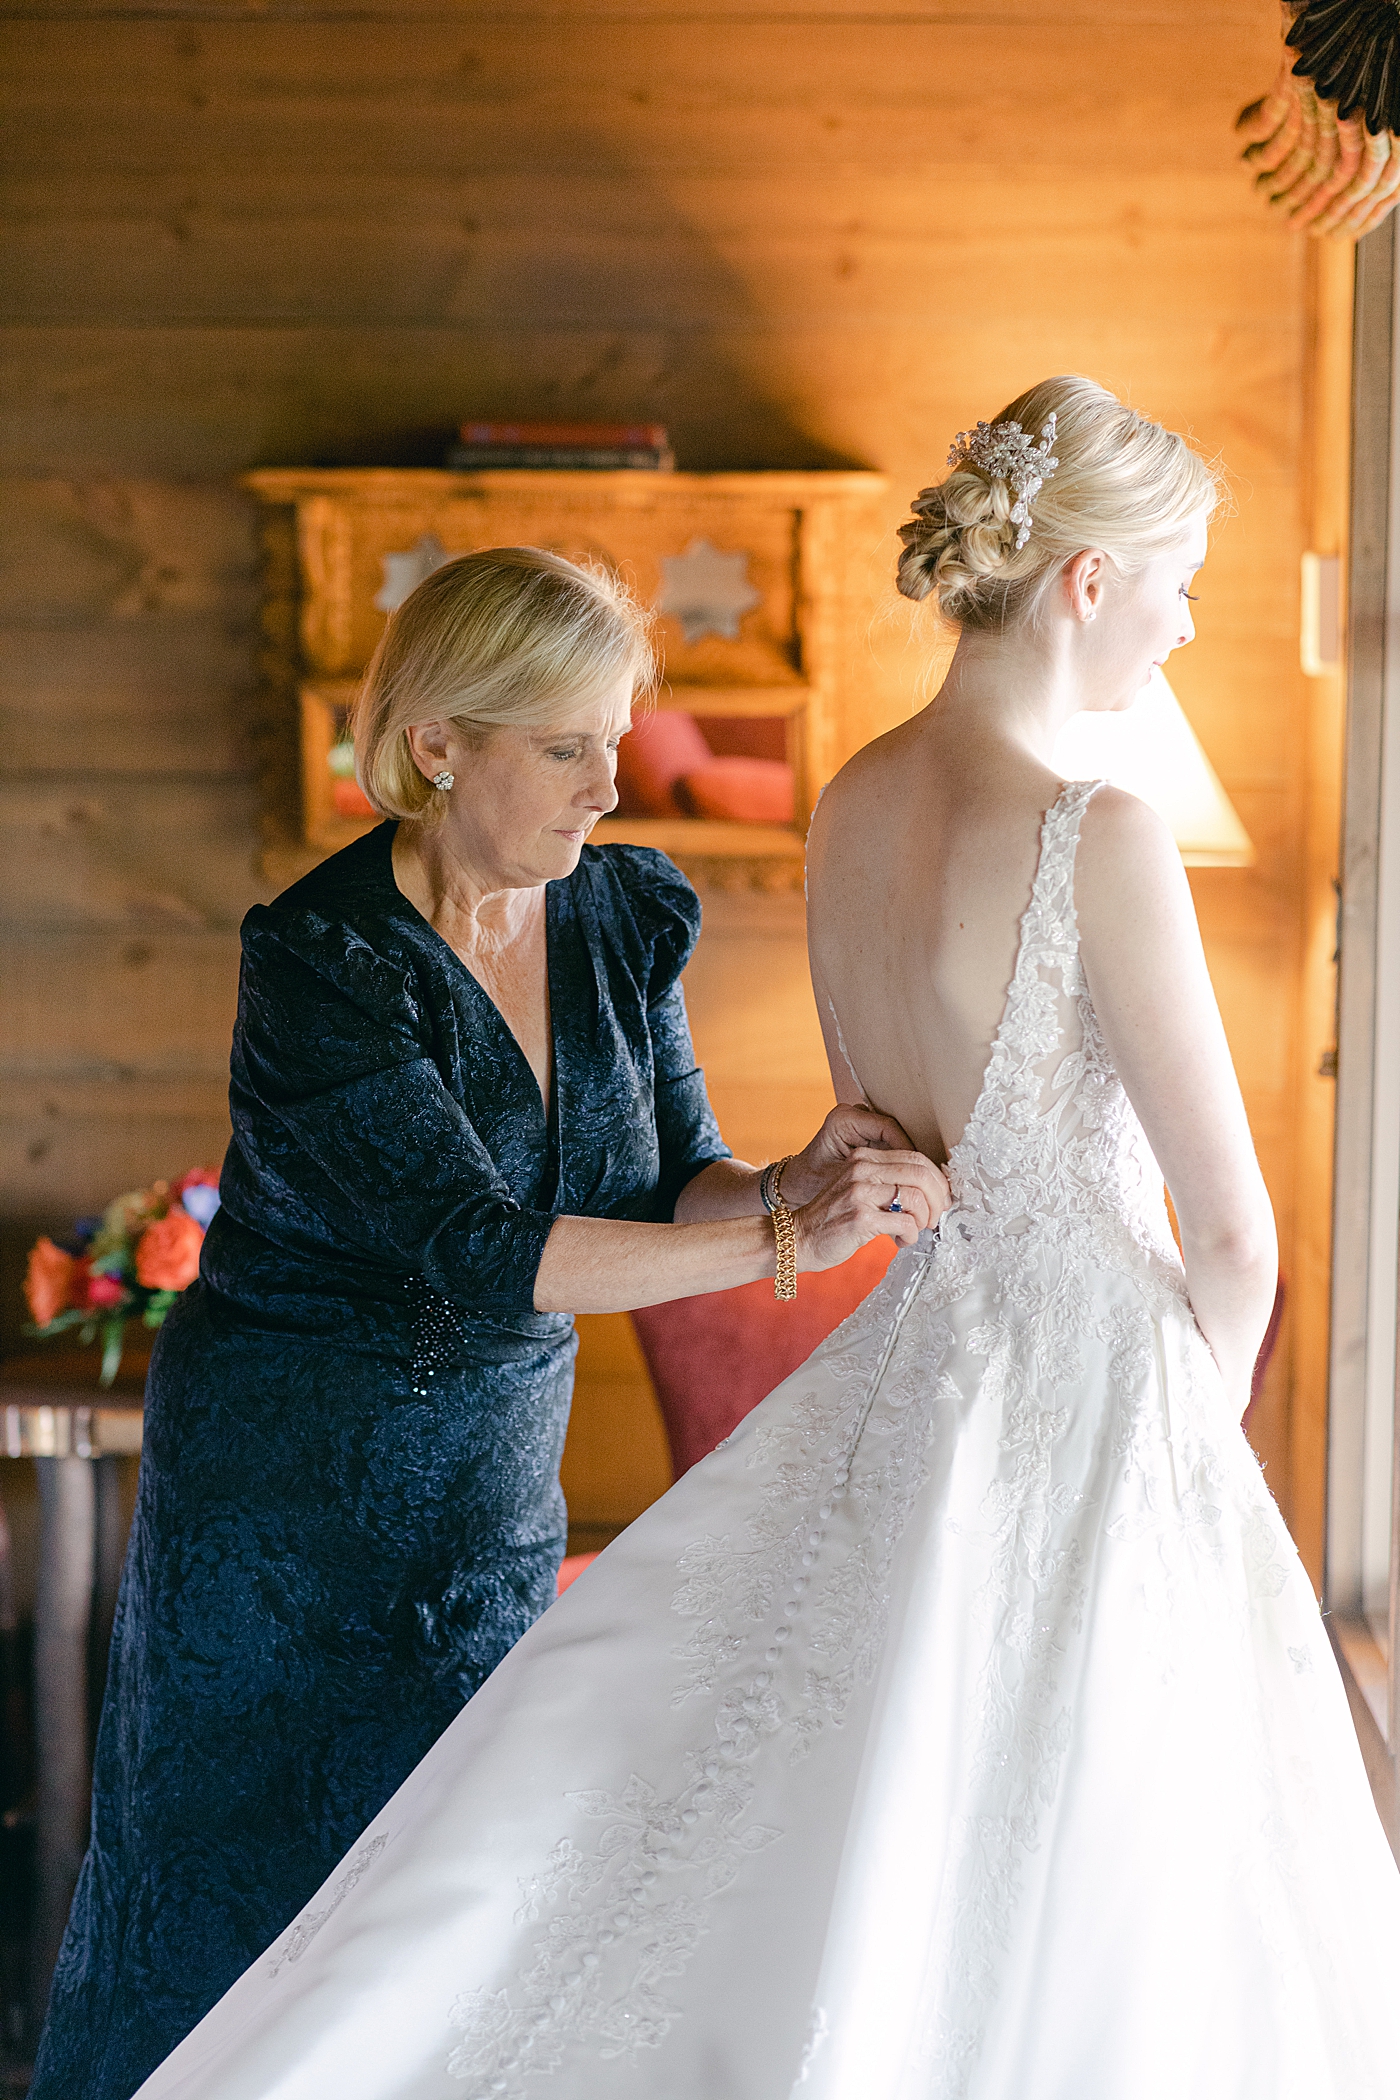 Bride being helped into her dress | Image by Hope Helmuth Photography